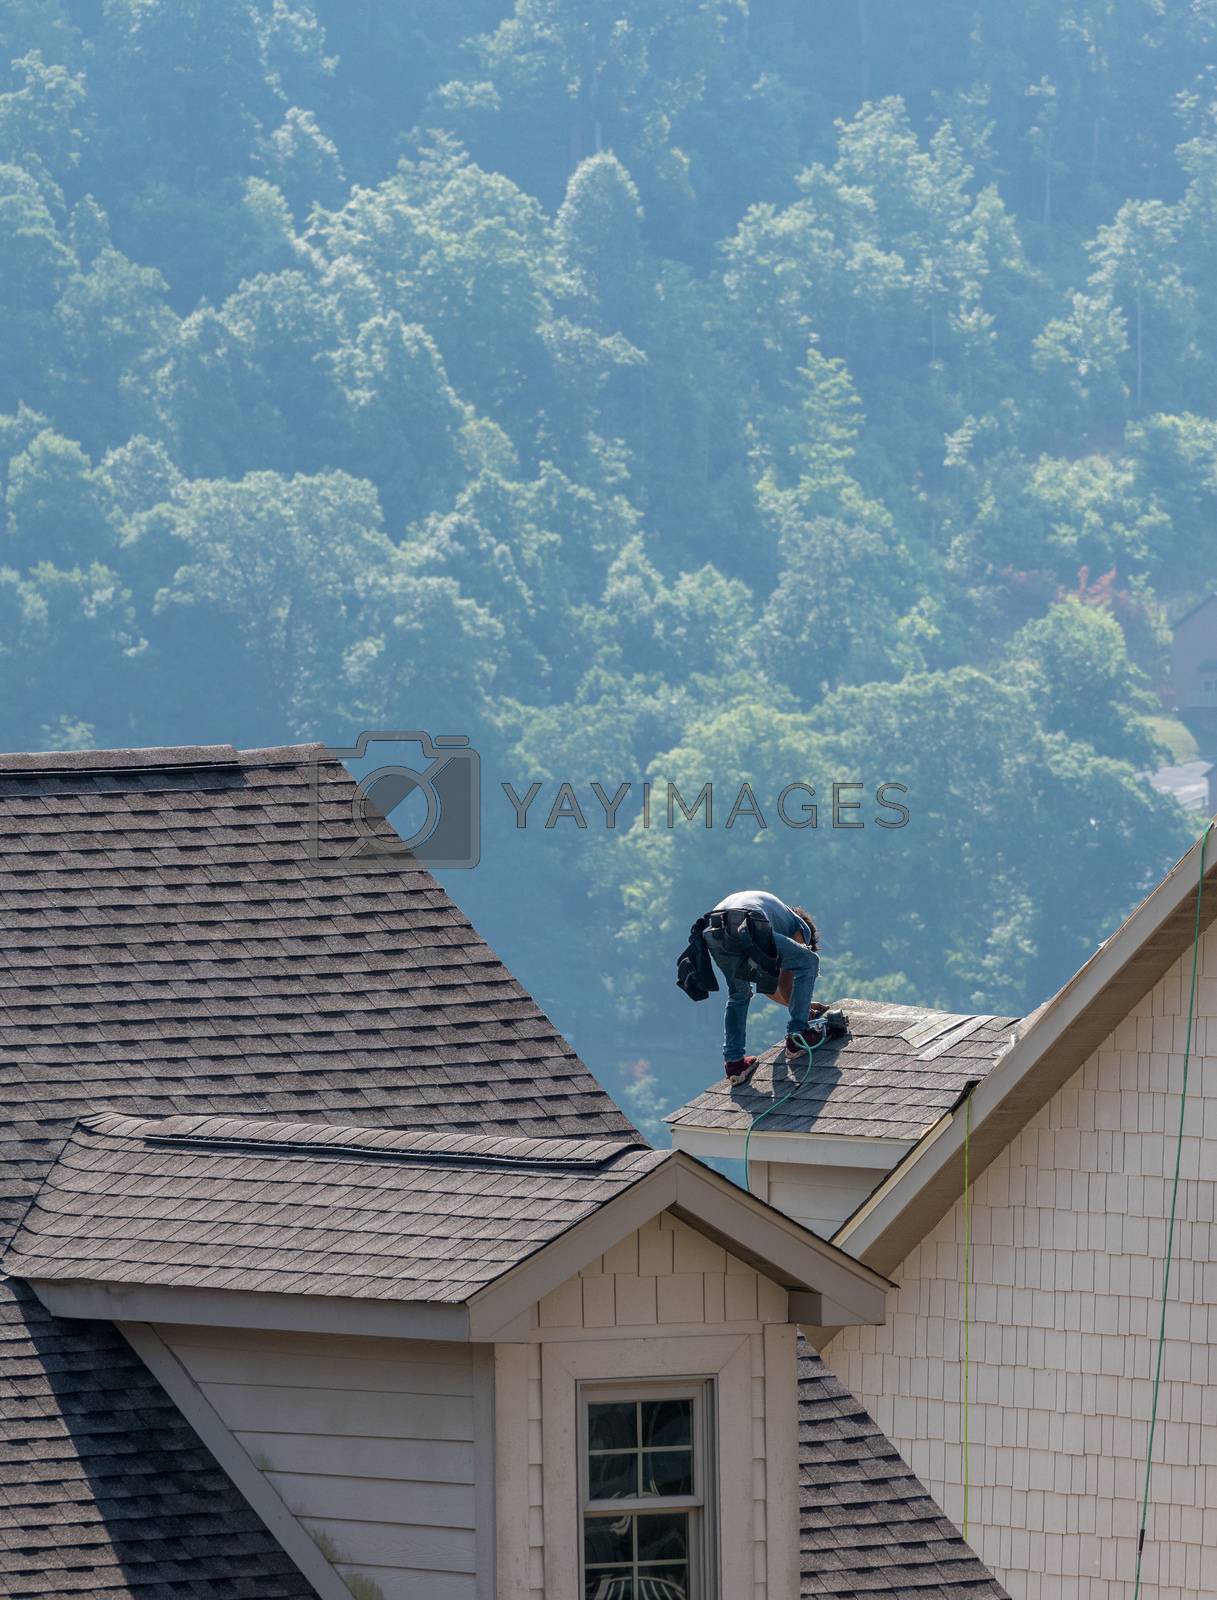 Royalty free image of Young roofing contractor nailing shingles on a roof high above the ground by steheap